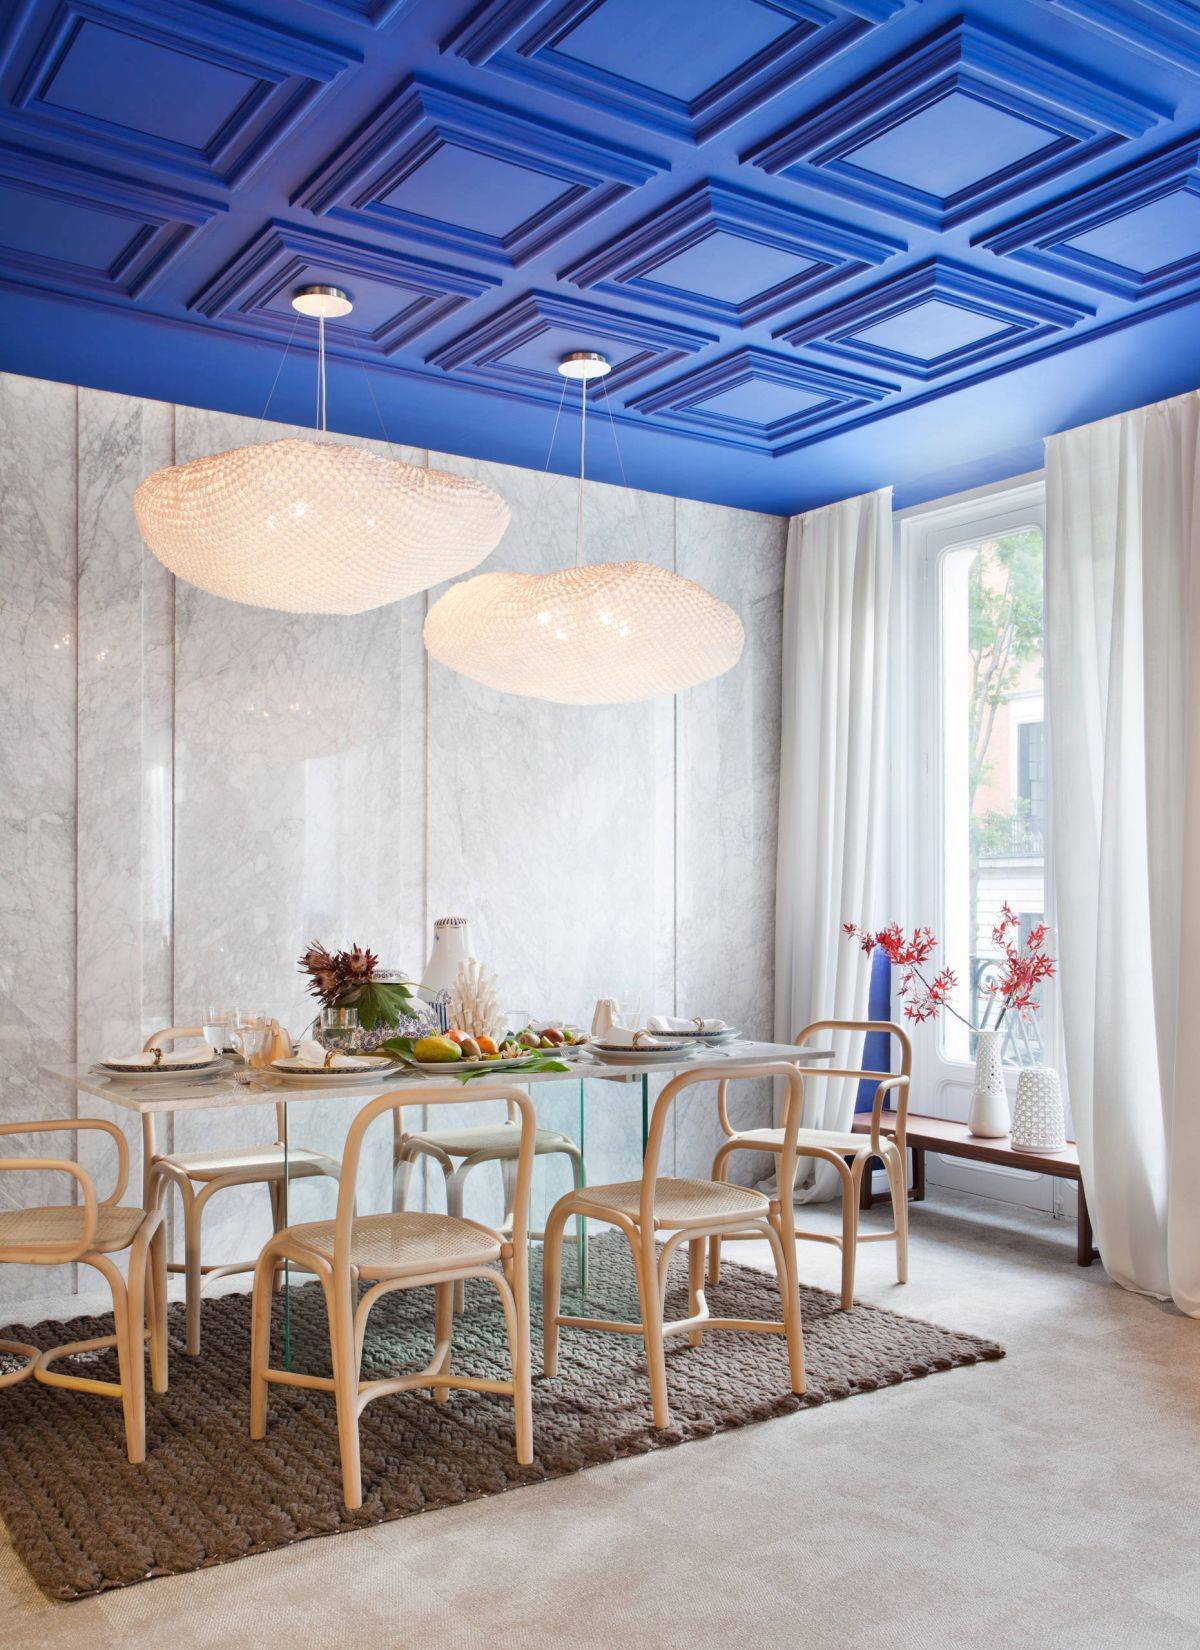 Coffered ceiling in deep blue adds color to this double-height dining room in white